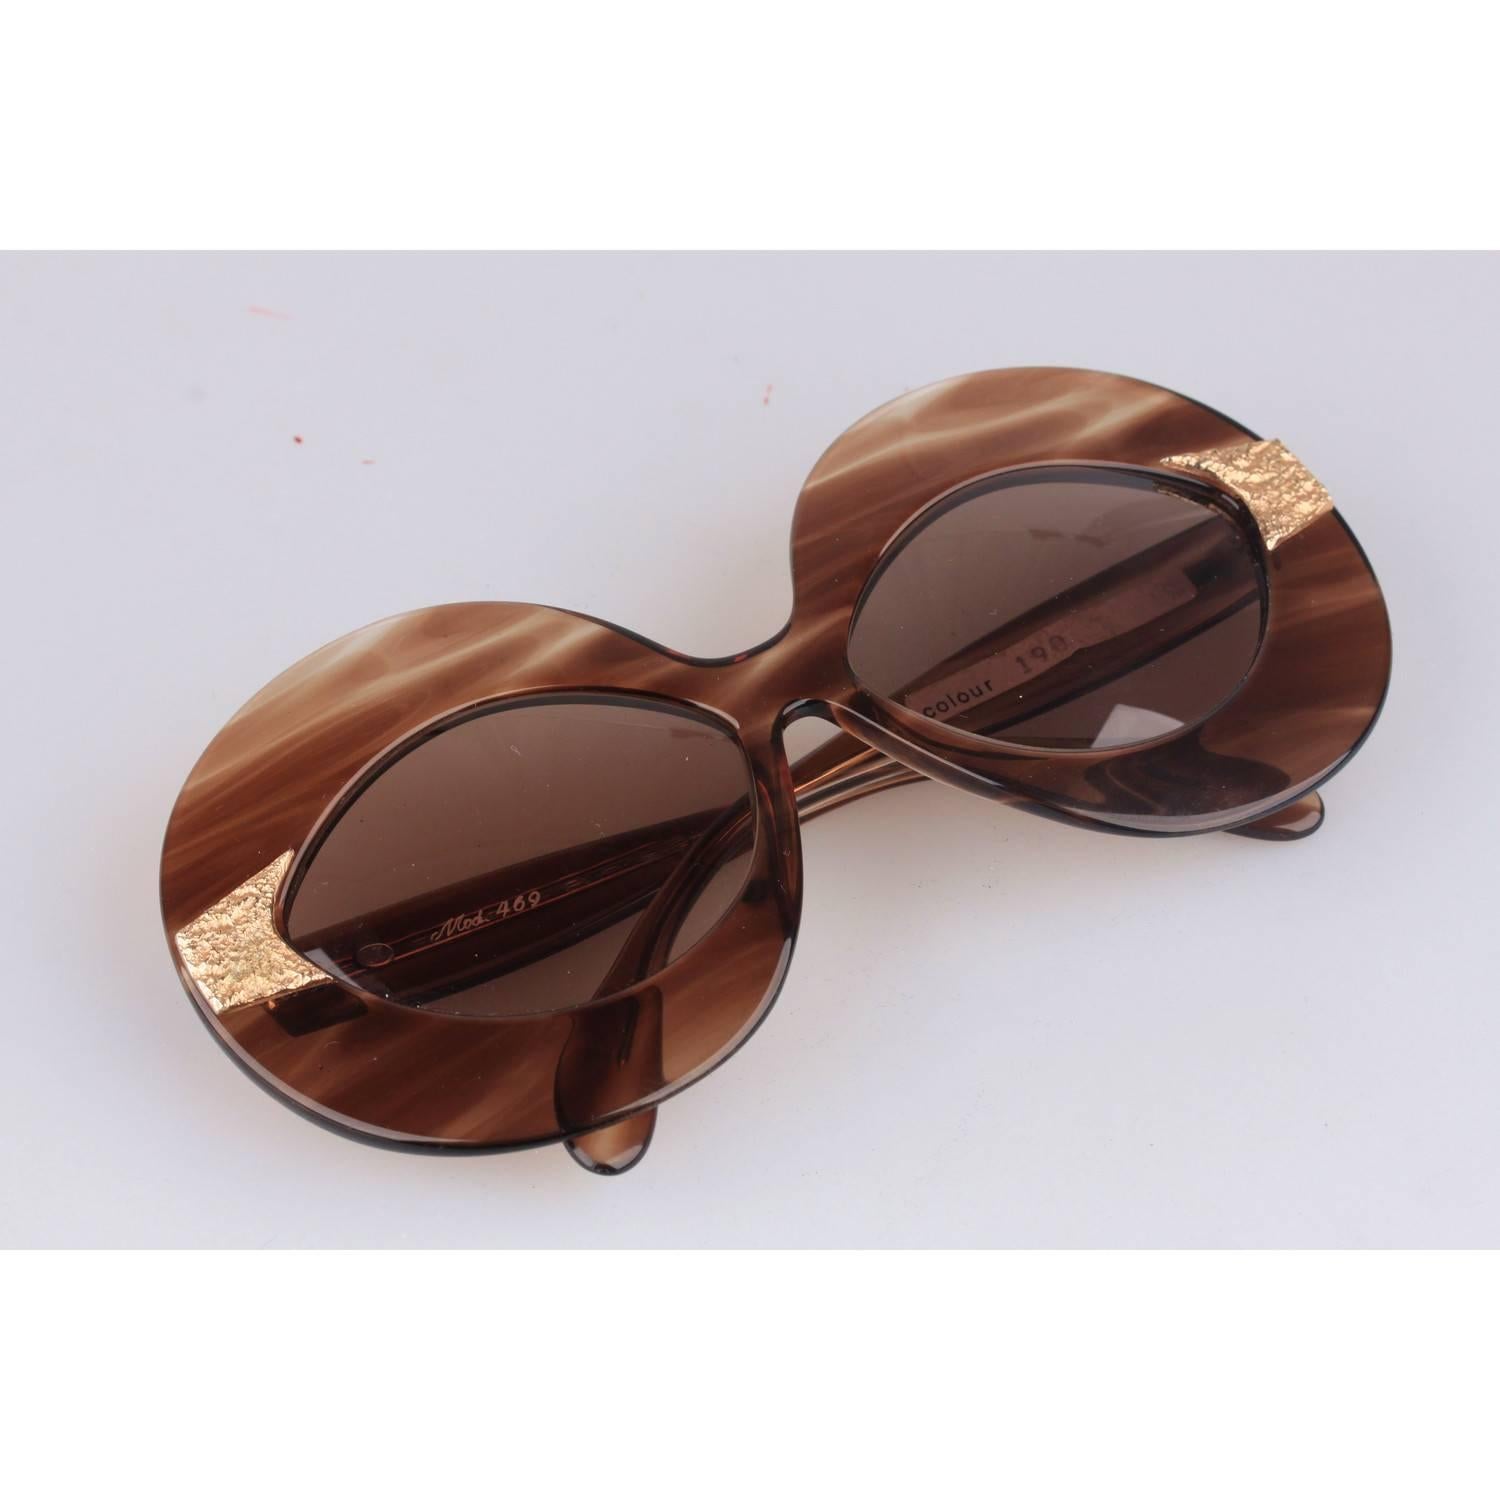 Super Rare Designer Sunglasses by genious SERGE KIRCHHOFER
Made in Austria, during the early 1970s
Gold 14K inserts
OPTYL semi transparent oversized Brown frame
Brown 100% UV Lens
mod. 469 - Col. 190

MATERIAL:

Optyl, Acetate

COLOR:

Brown

LENS